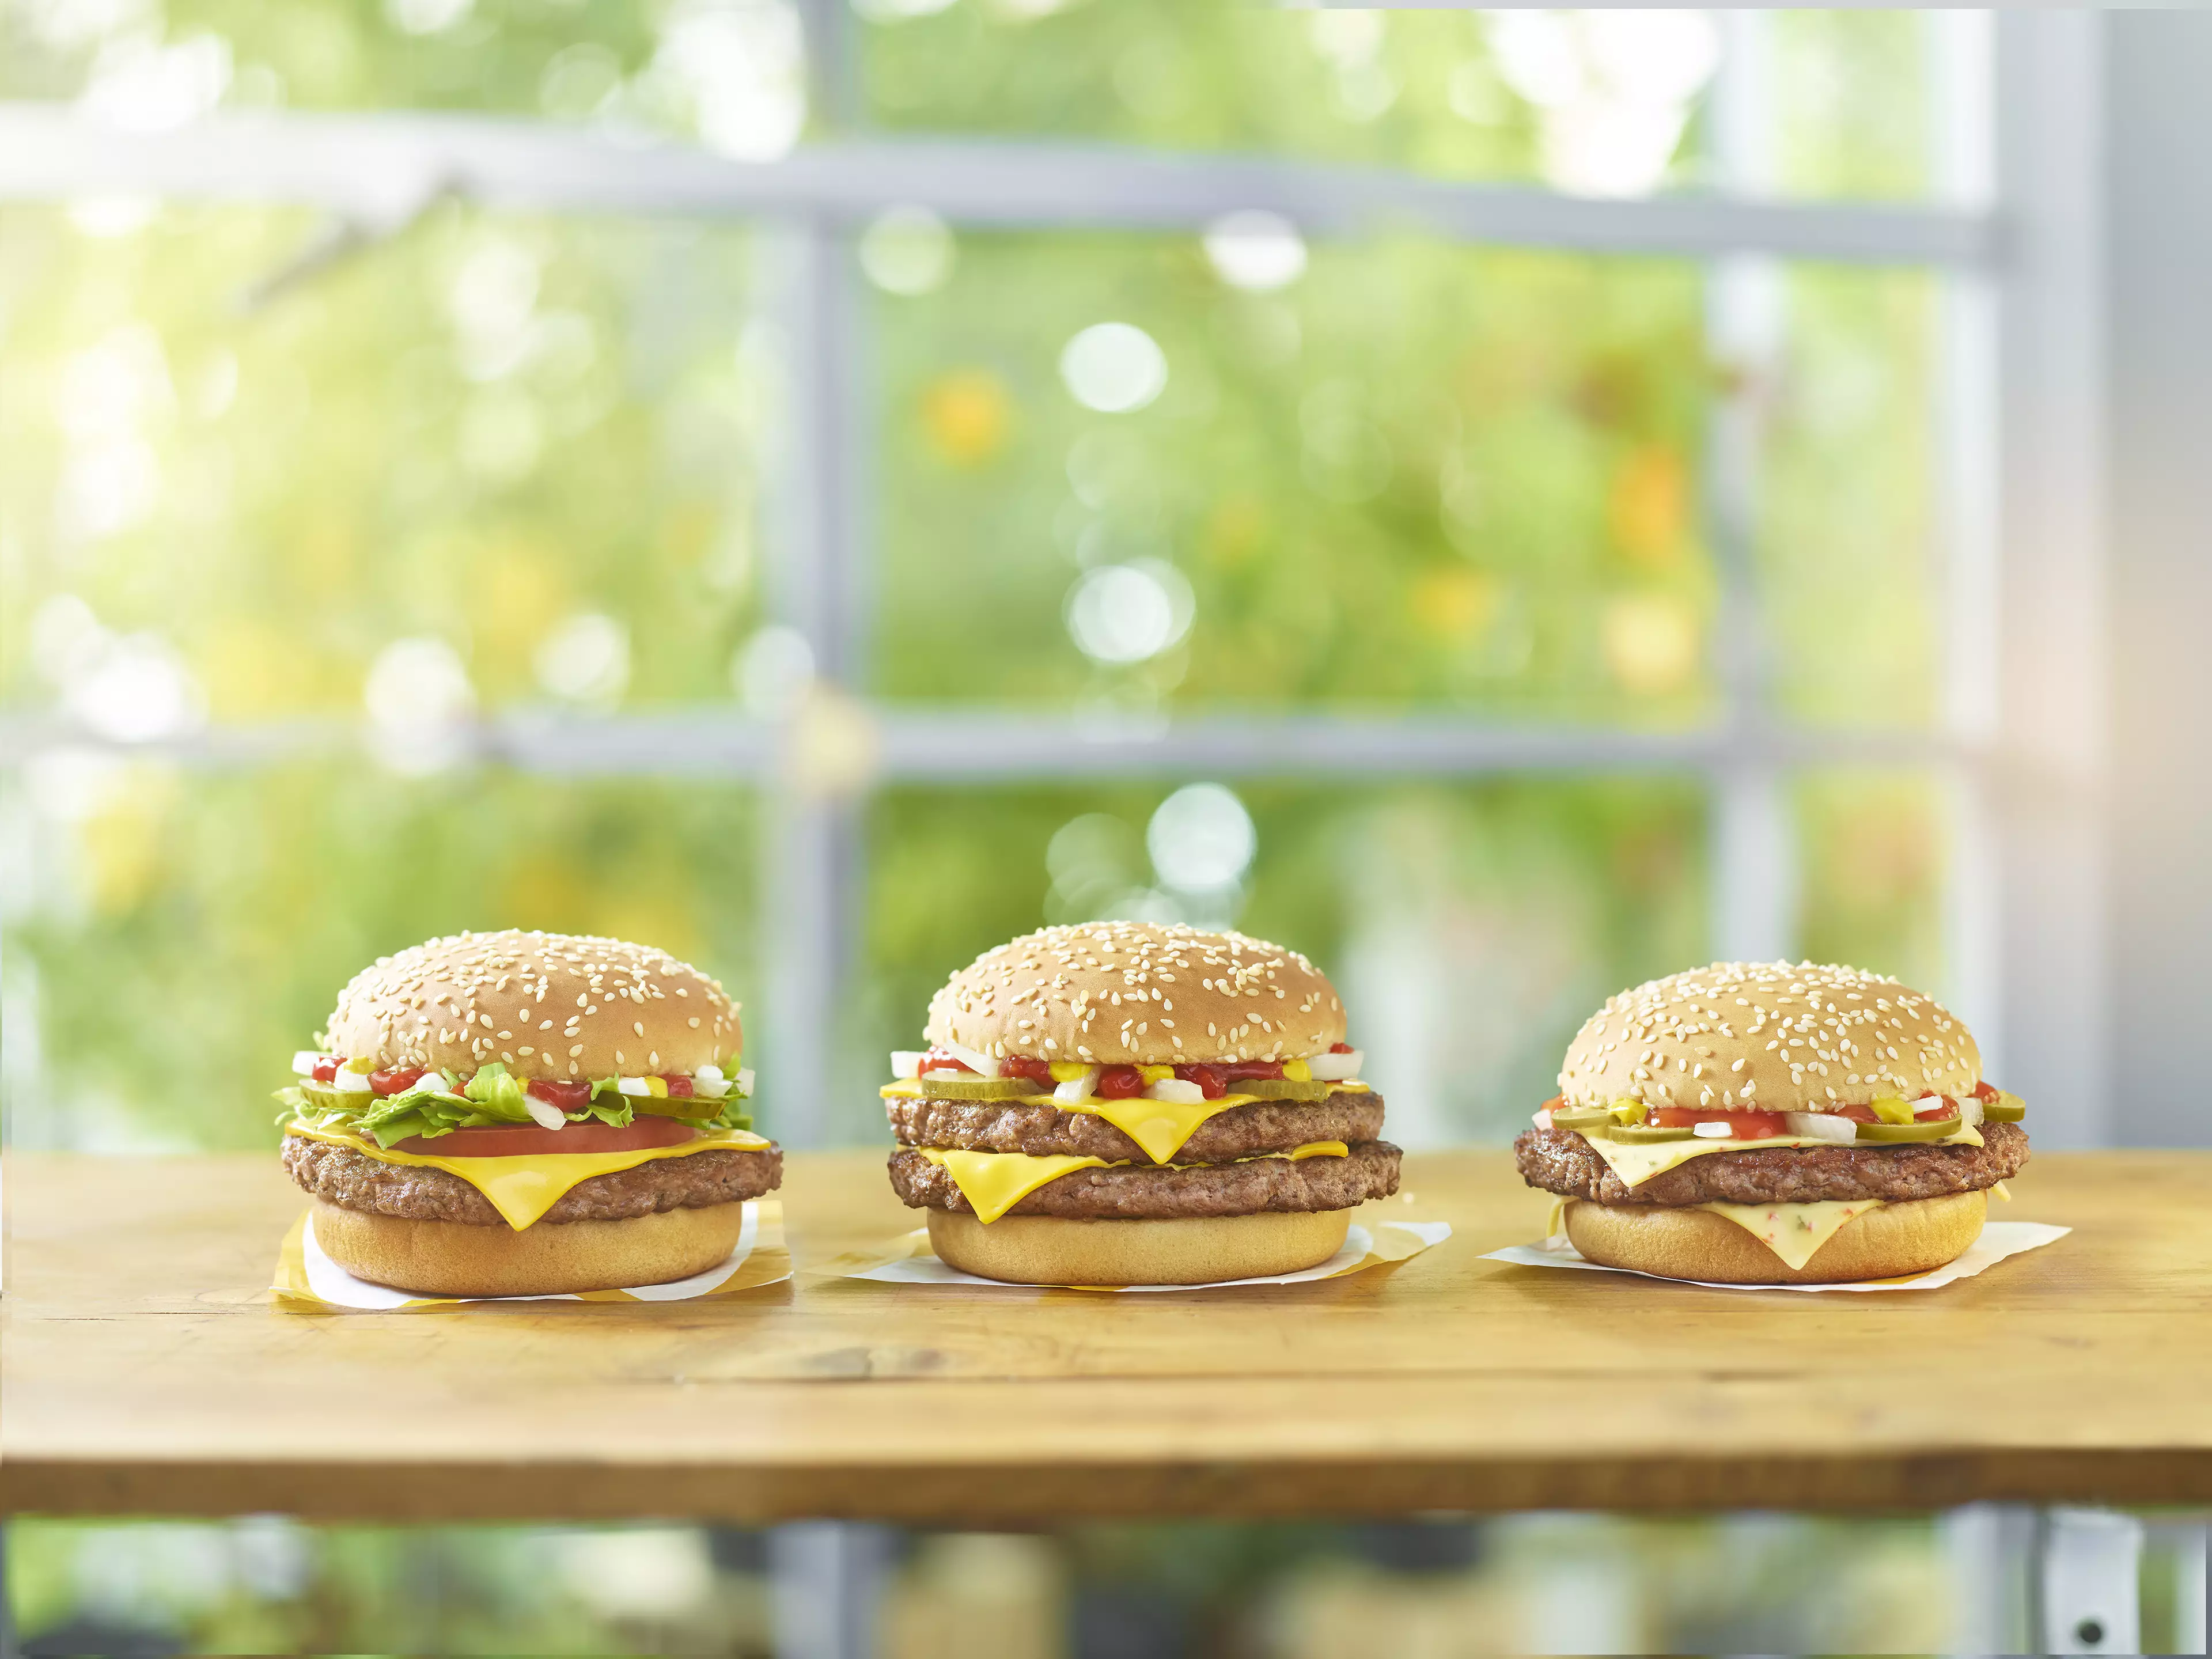 There are now three versions of the delicious burger (